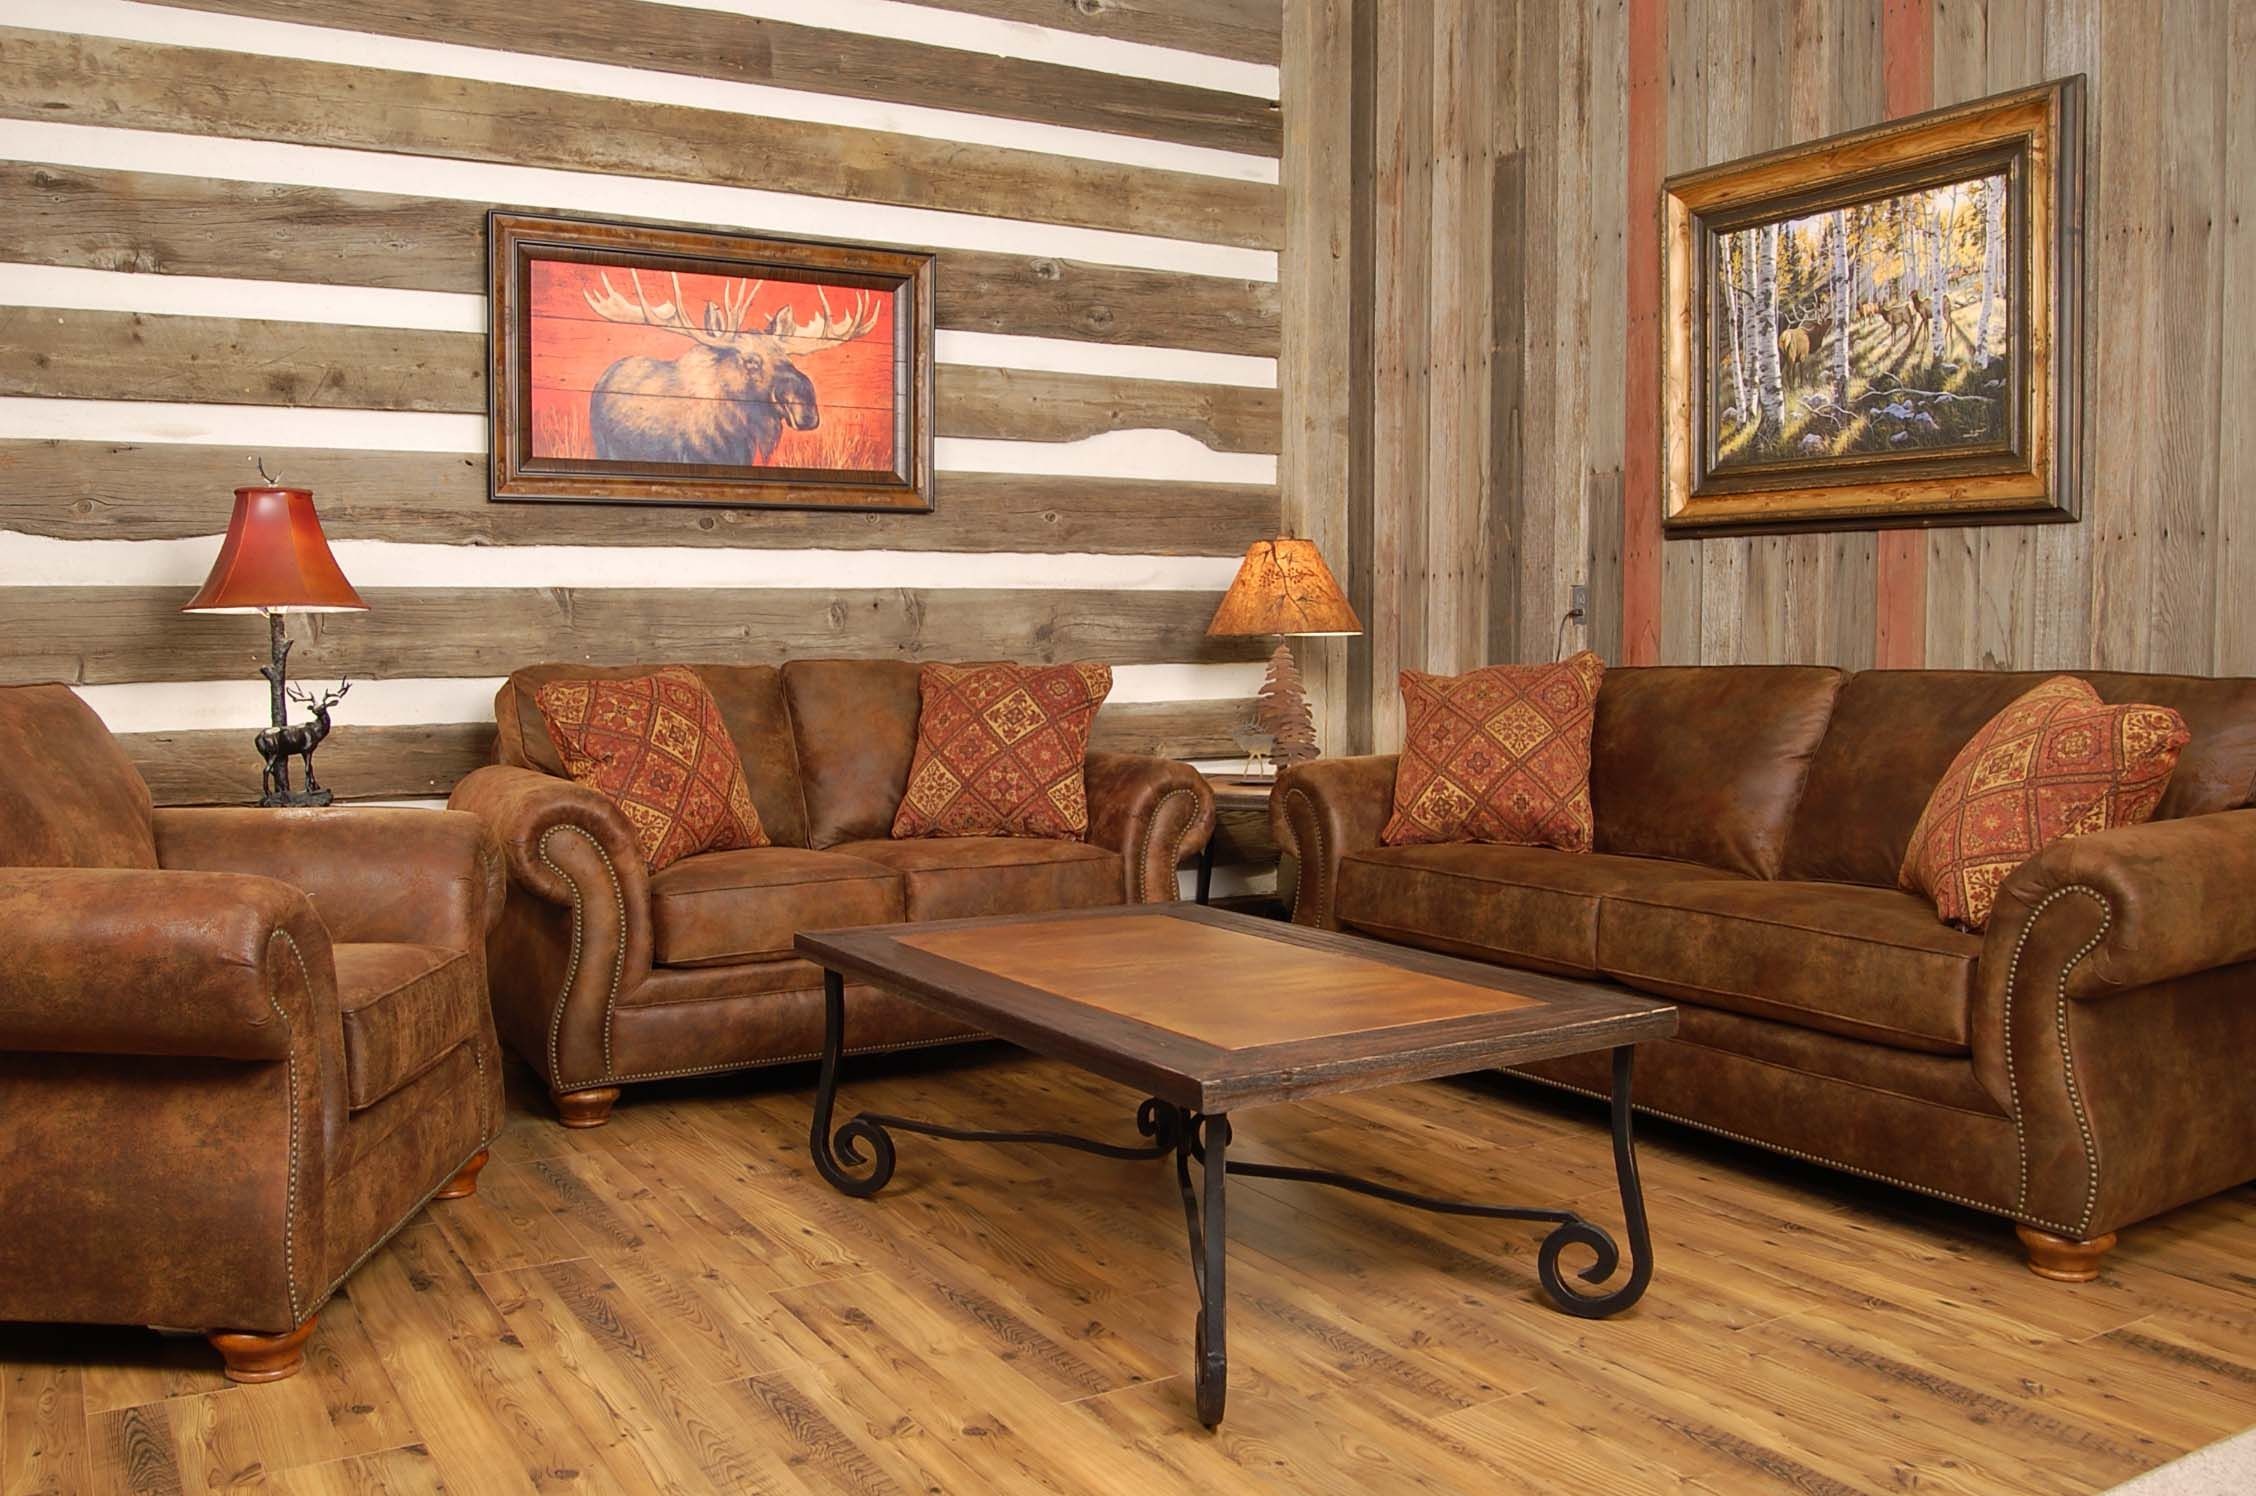 2256x1496 Cool Leather Sofa Set Wallpapers Odd. country home decor ideas. home decor  help. ...